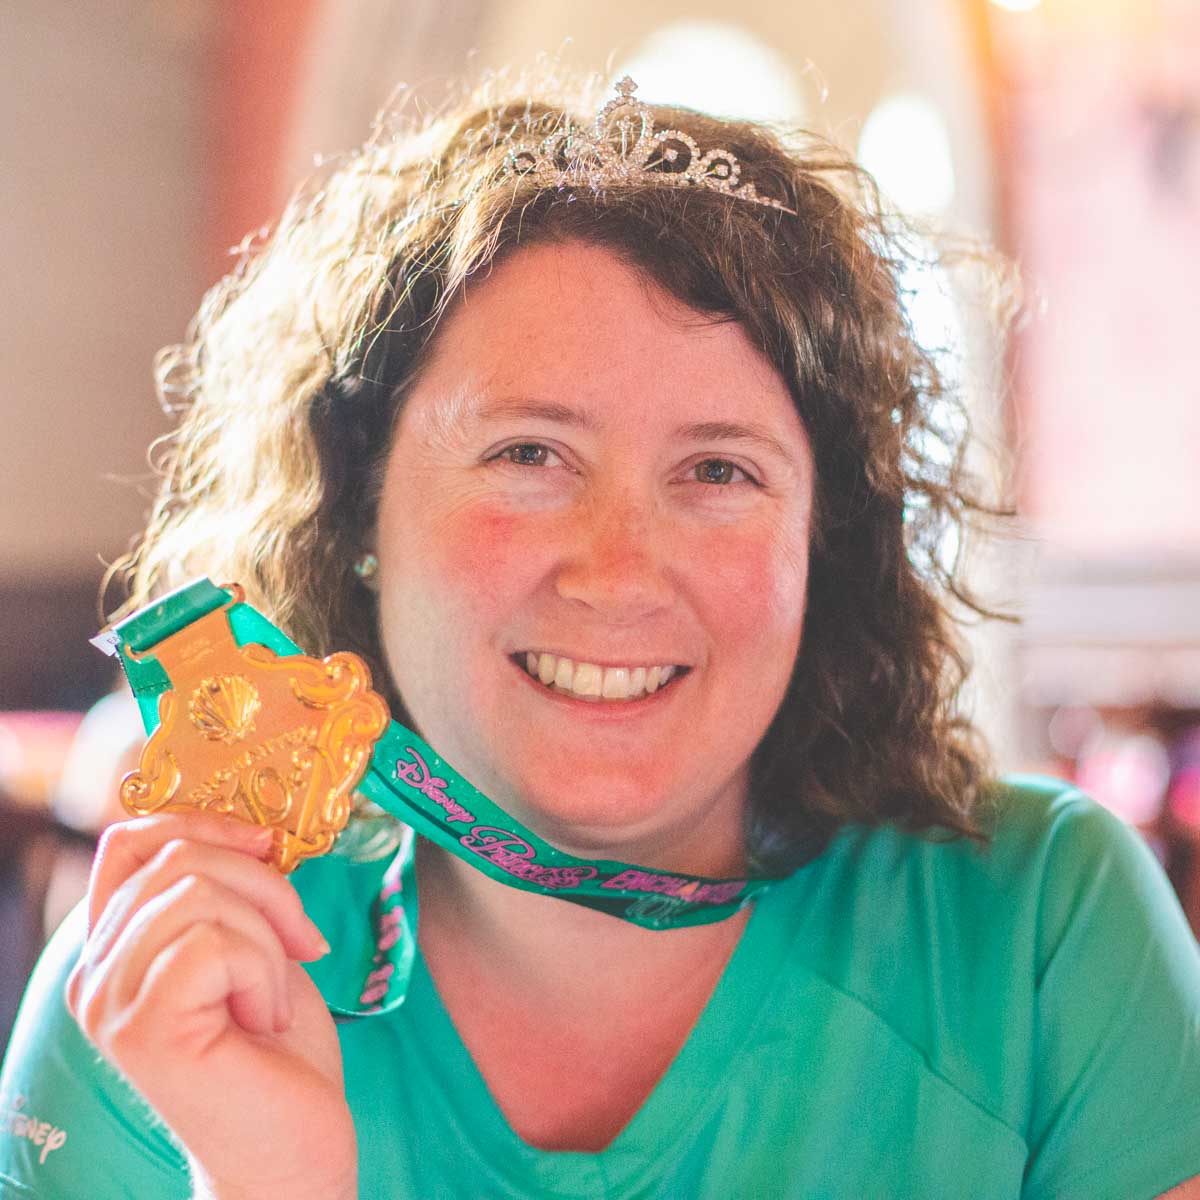 A runner poses with her runDisney medal after running the Enchanted 10K.